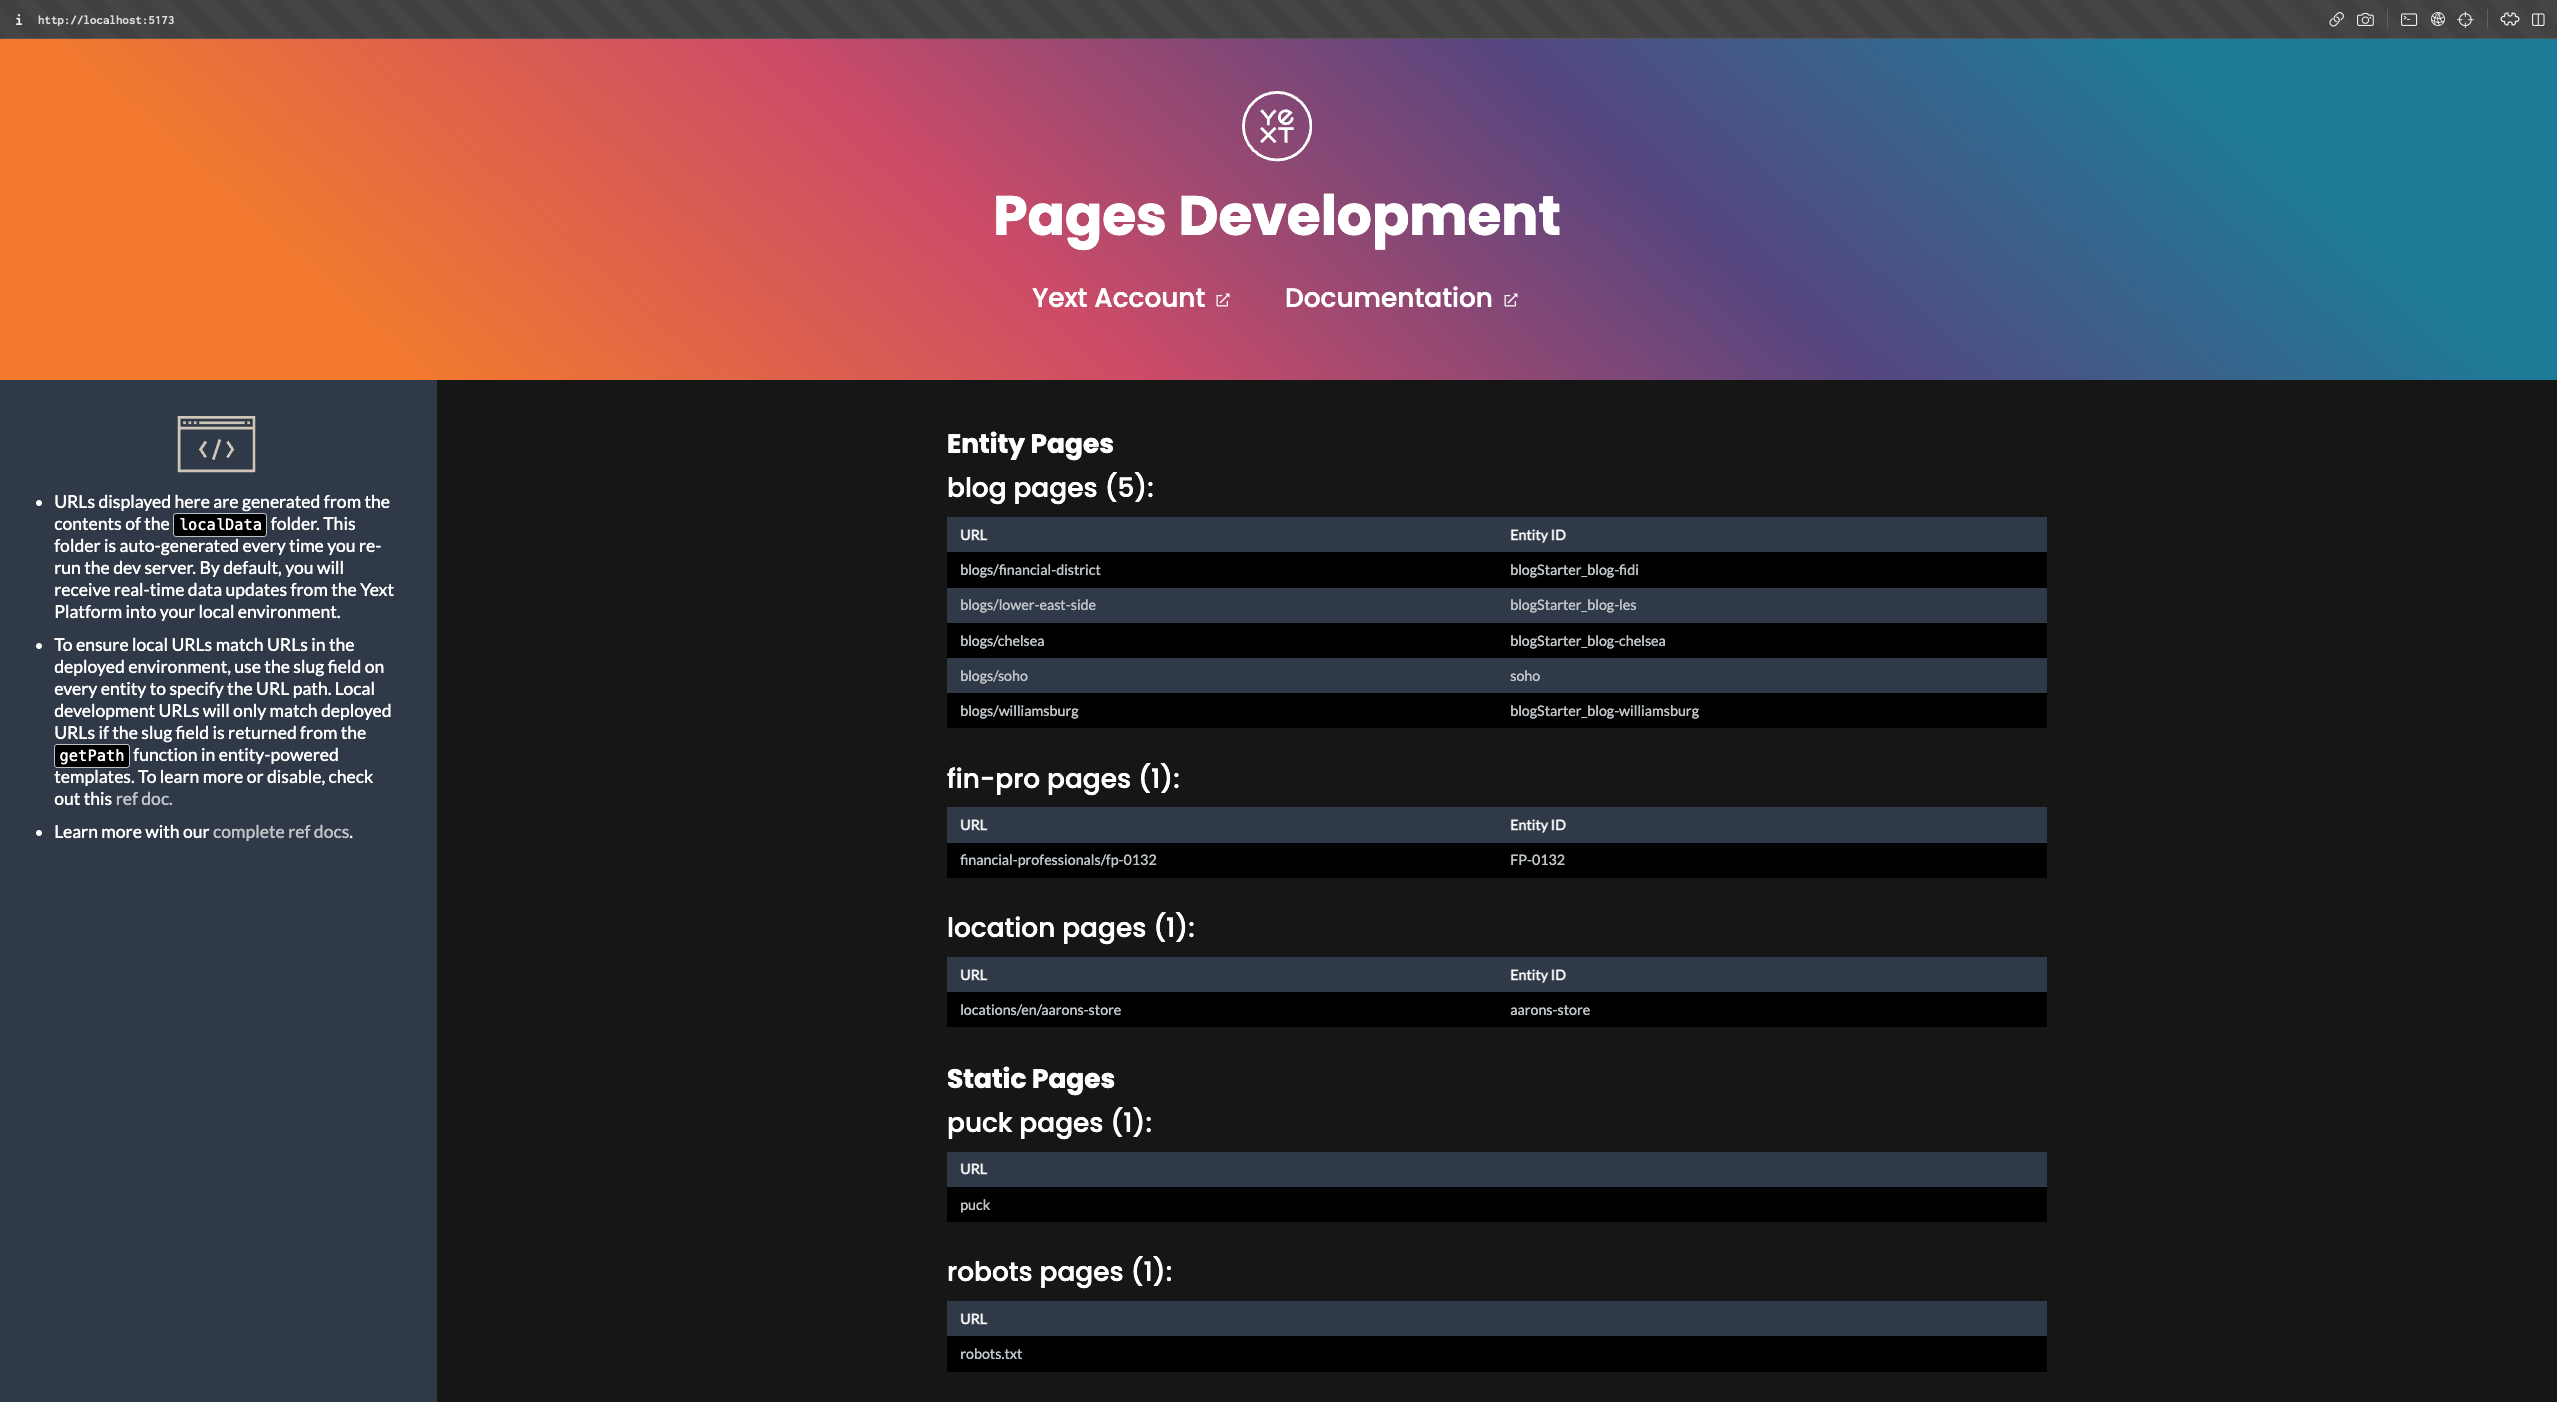 Pages Development Page